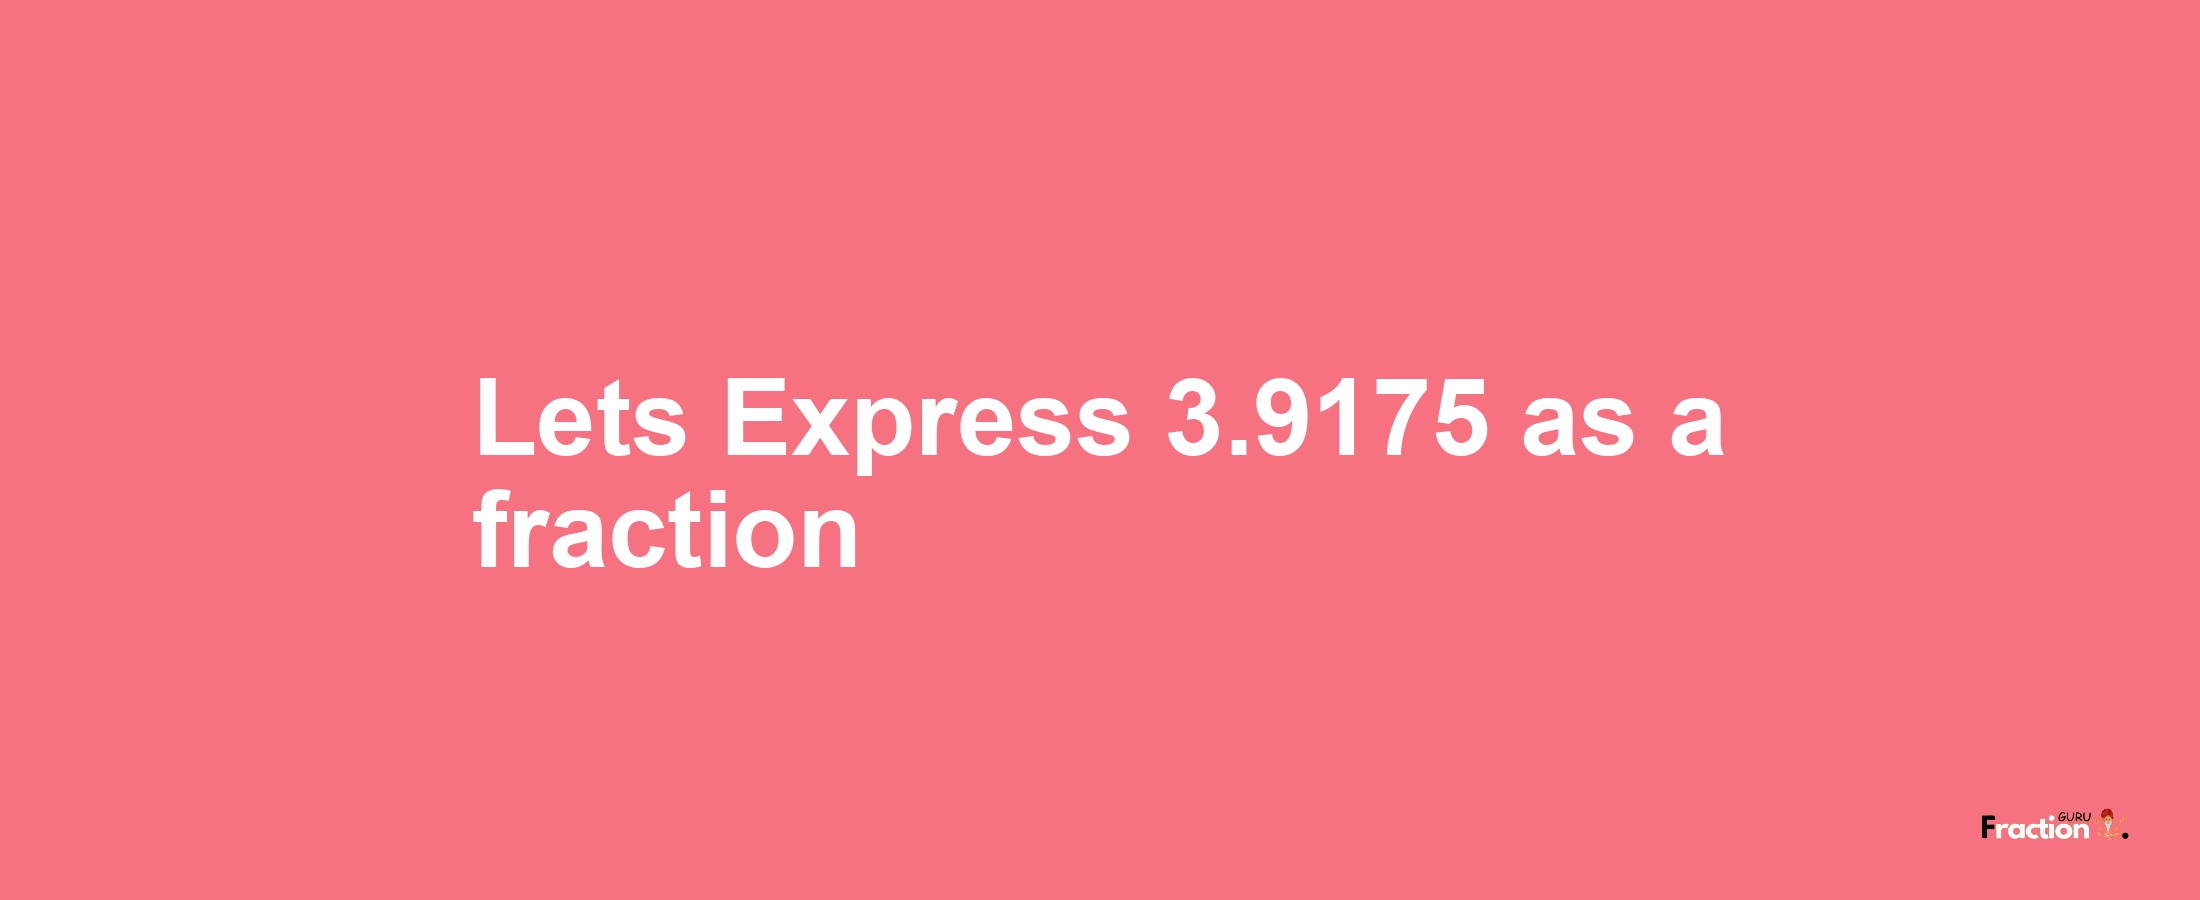 Lets Express 3.9175 as afraction